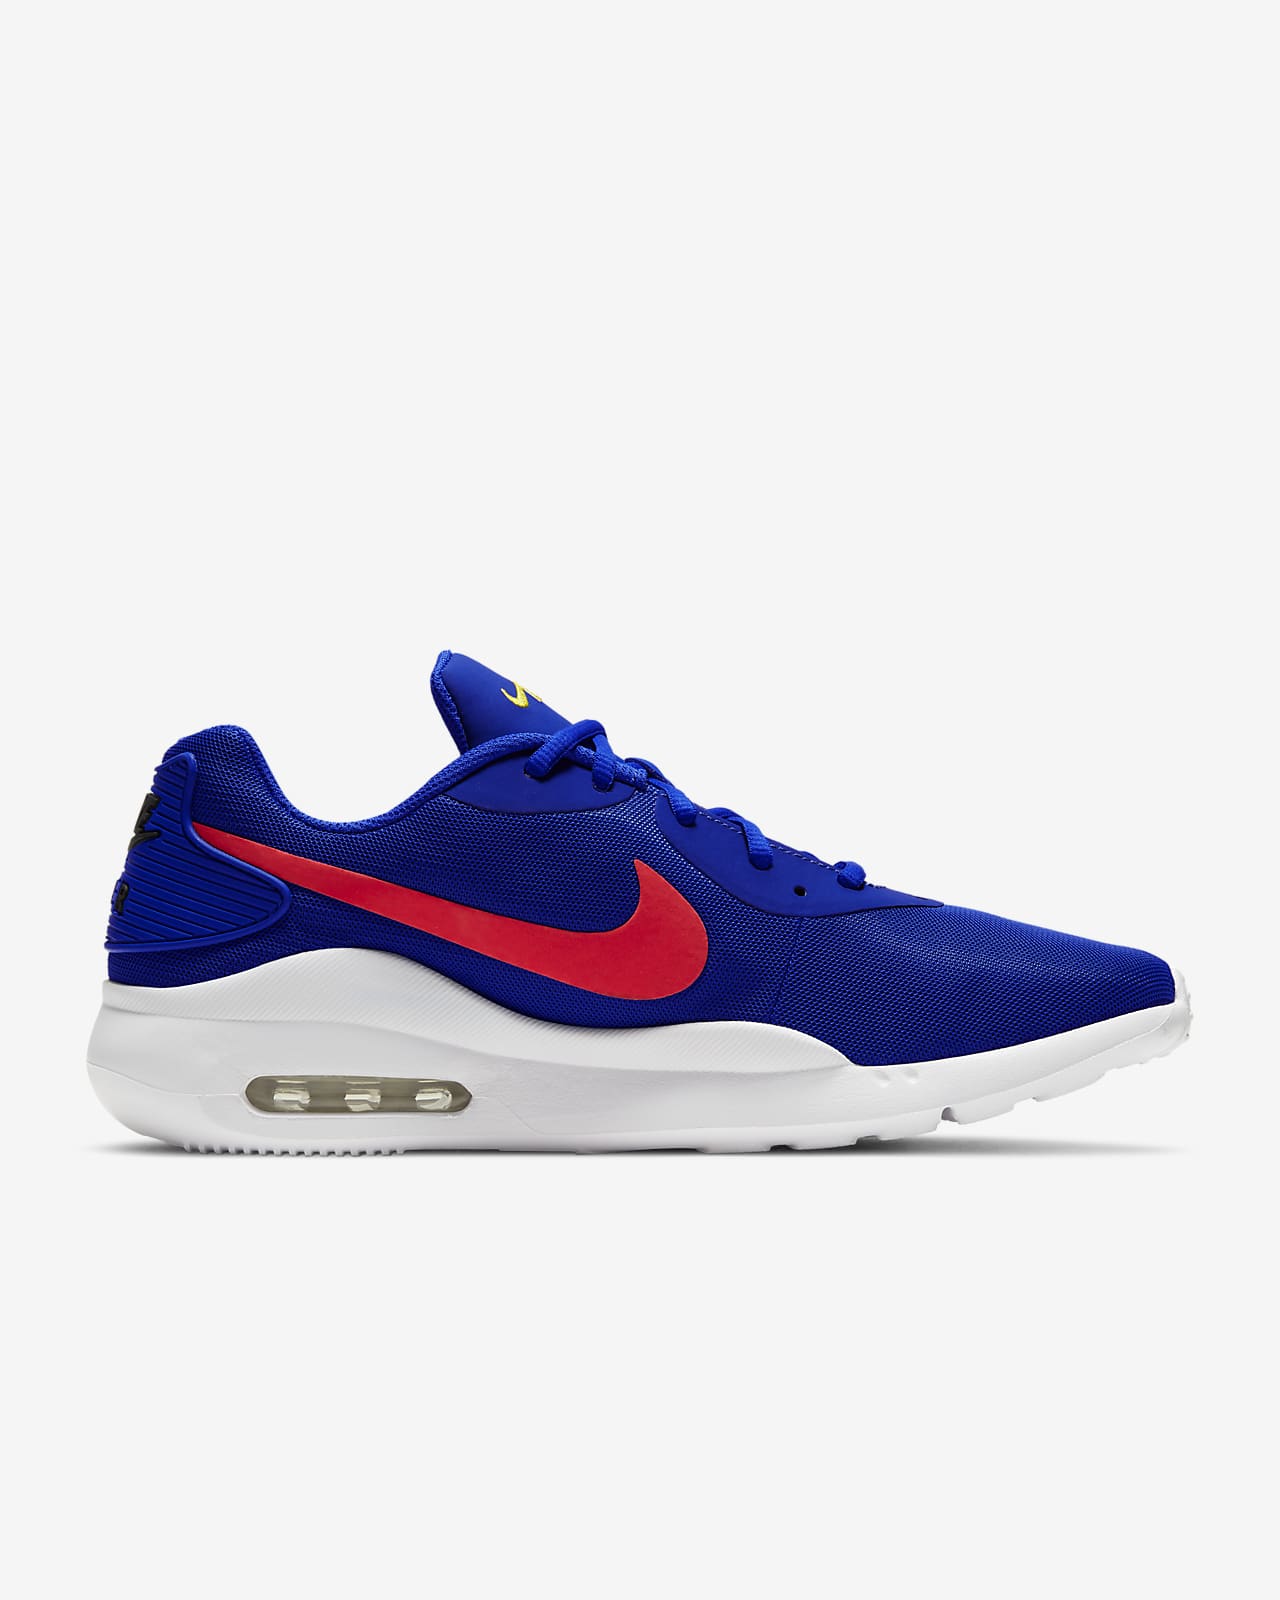 are nike air max oketo running shoes